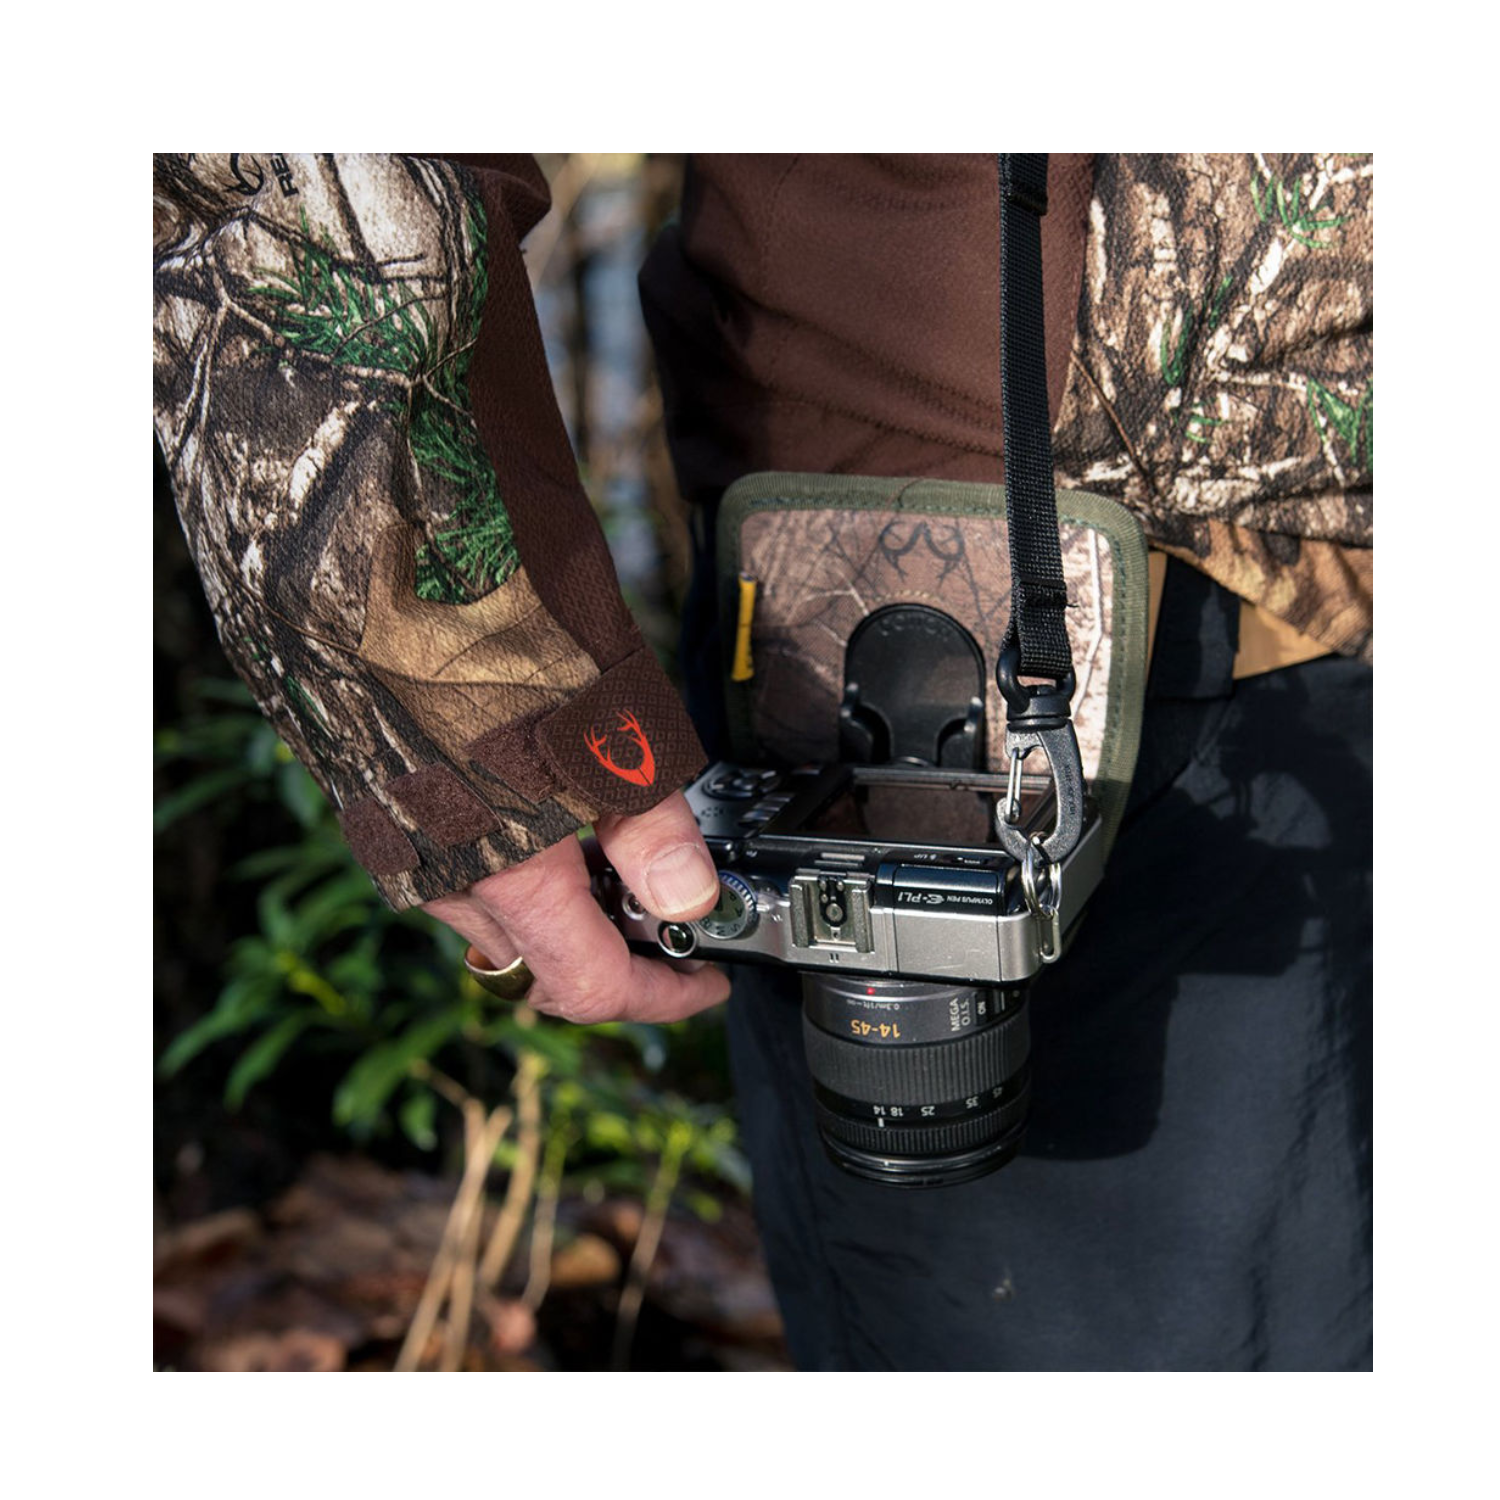 Cotton Carrier CCS G3 Wanderer Side Holster for All Camera Body Styles - Camo